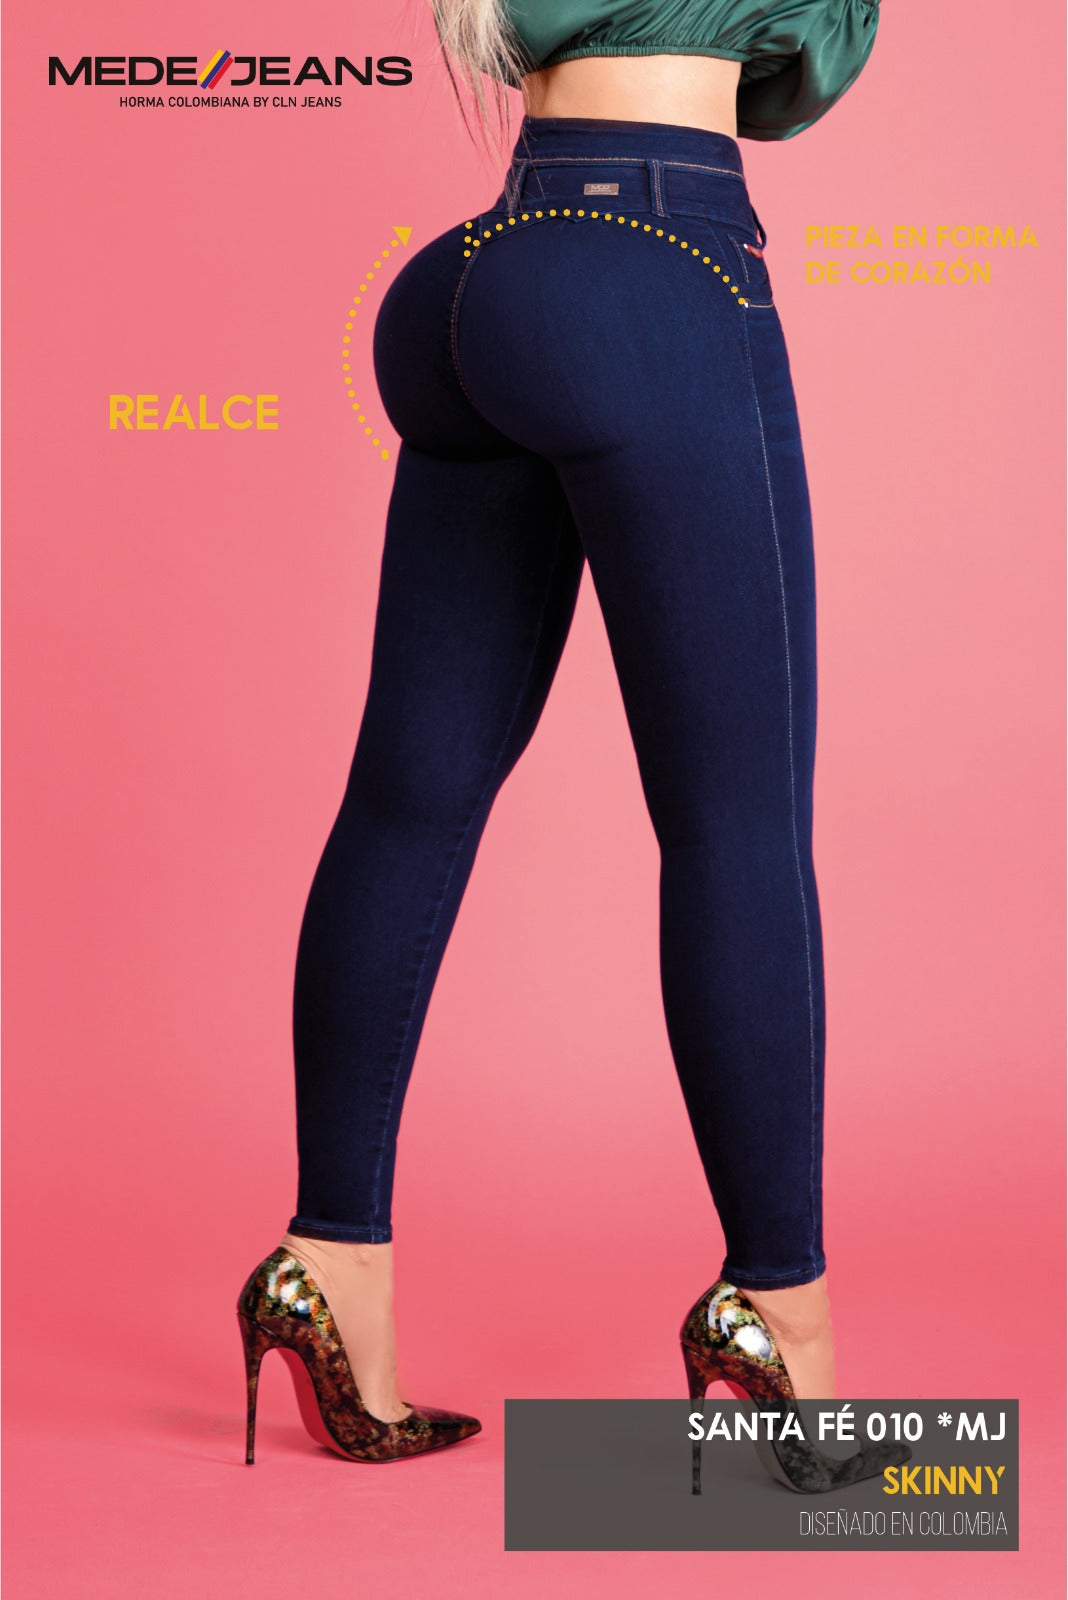 Mede jeans colombianos MD010